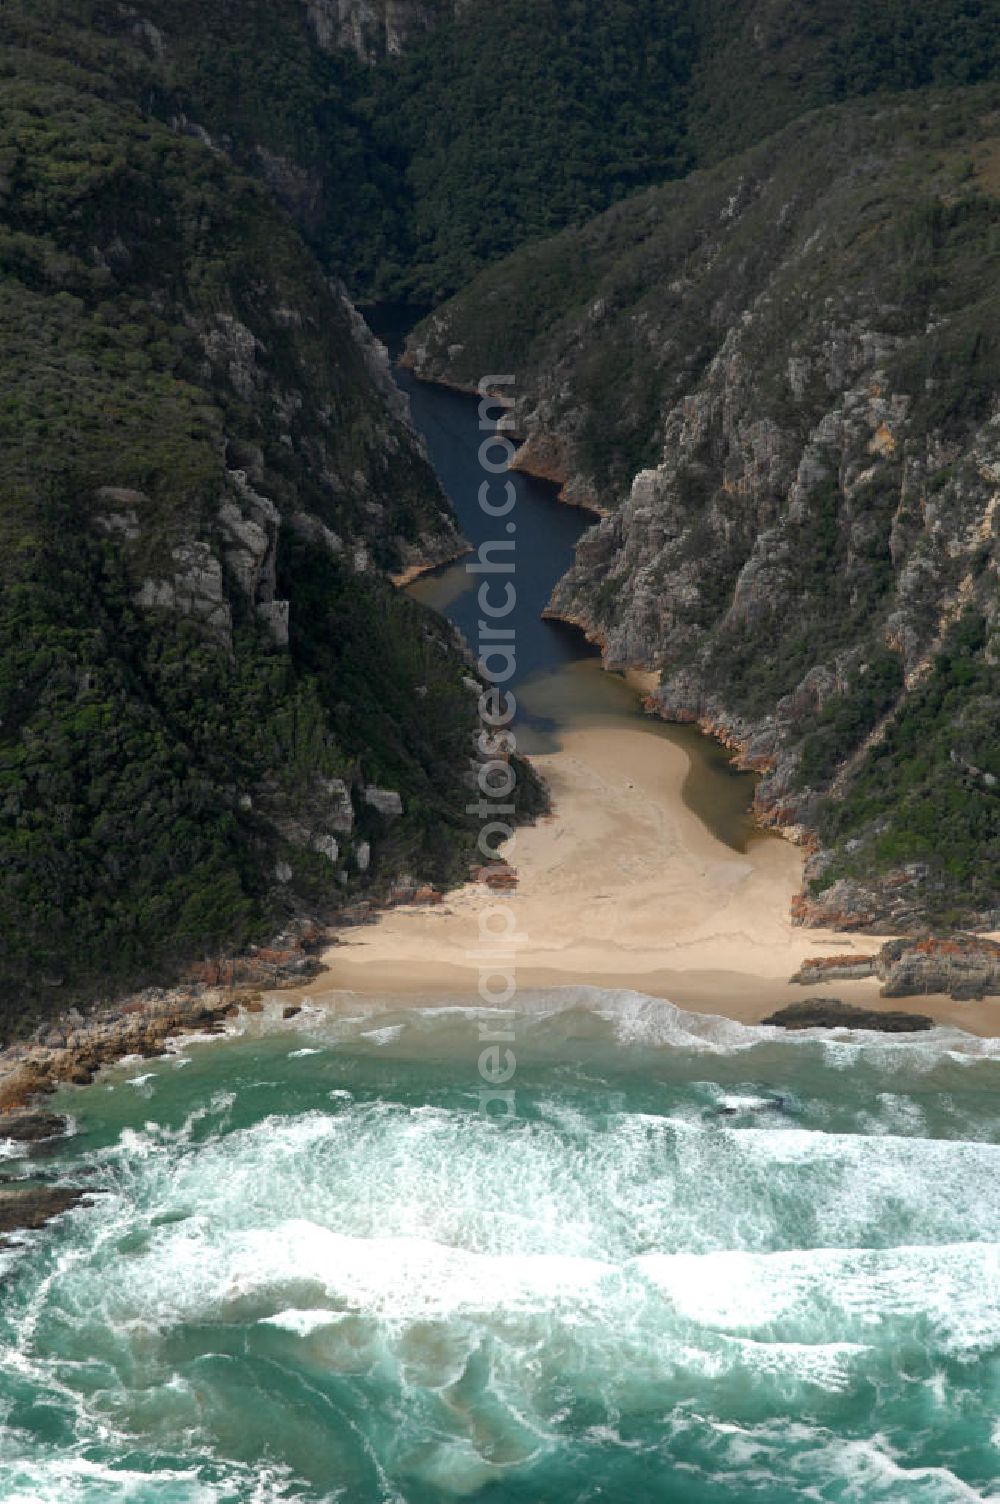 Aerial photograph GOUKAMMA - Mouth of the Goukamma River in South Africa. The river flows through the Goukamma Nature Reserve in the district of Western Cape